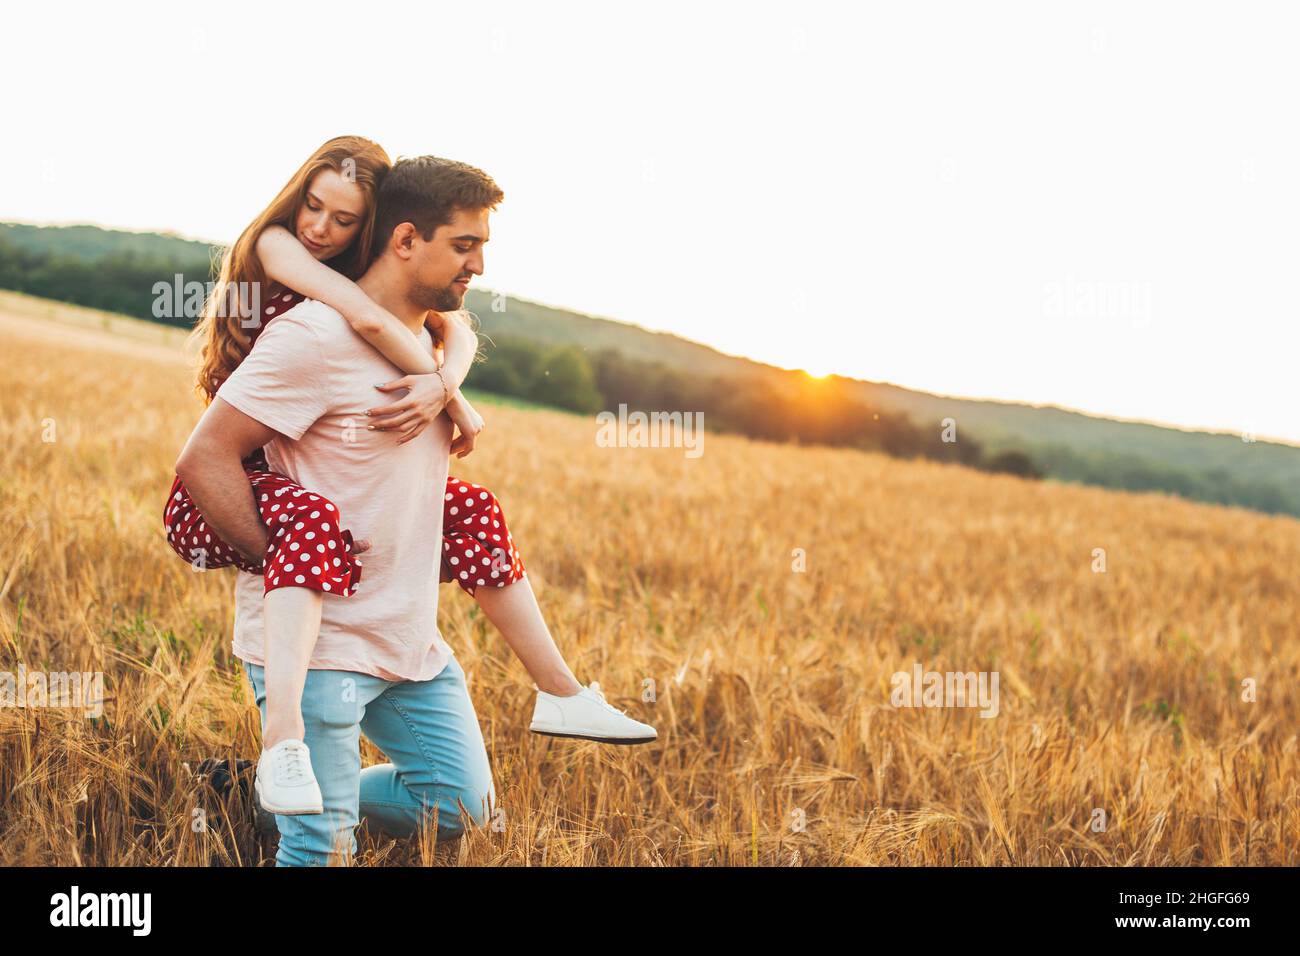 Caucasian man giving piggy back ride to his readheaded girlfriend in the wheat field. Stock Photo